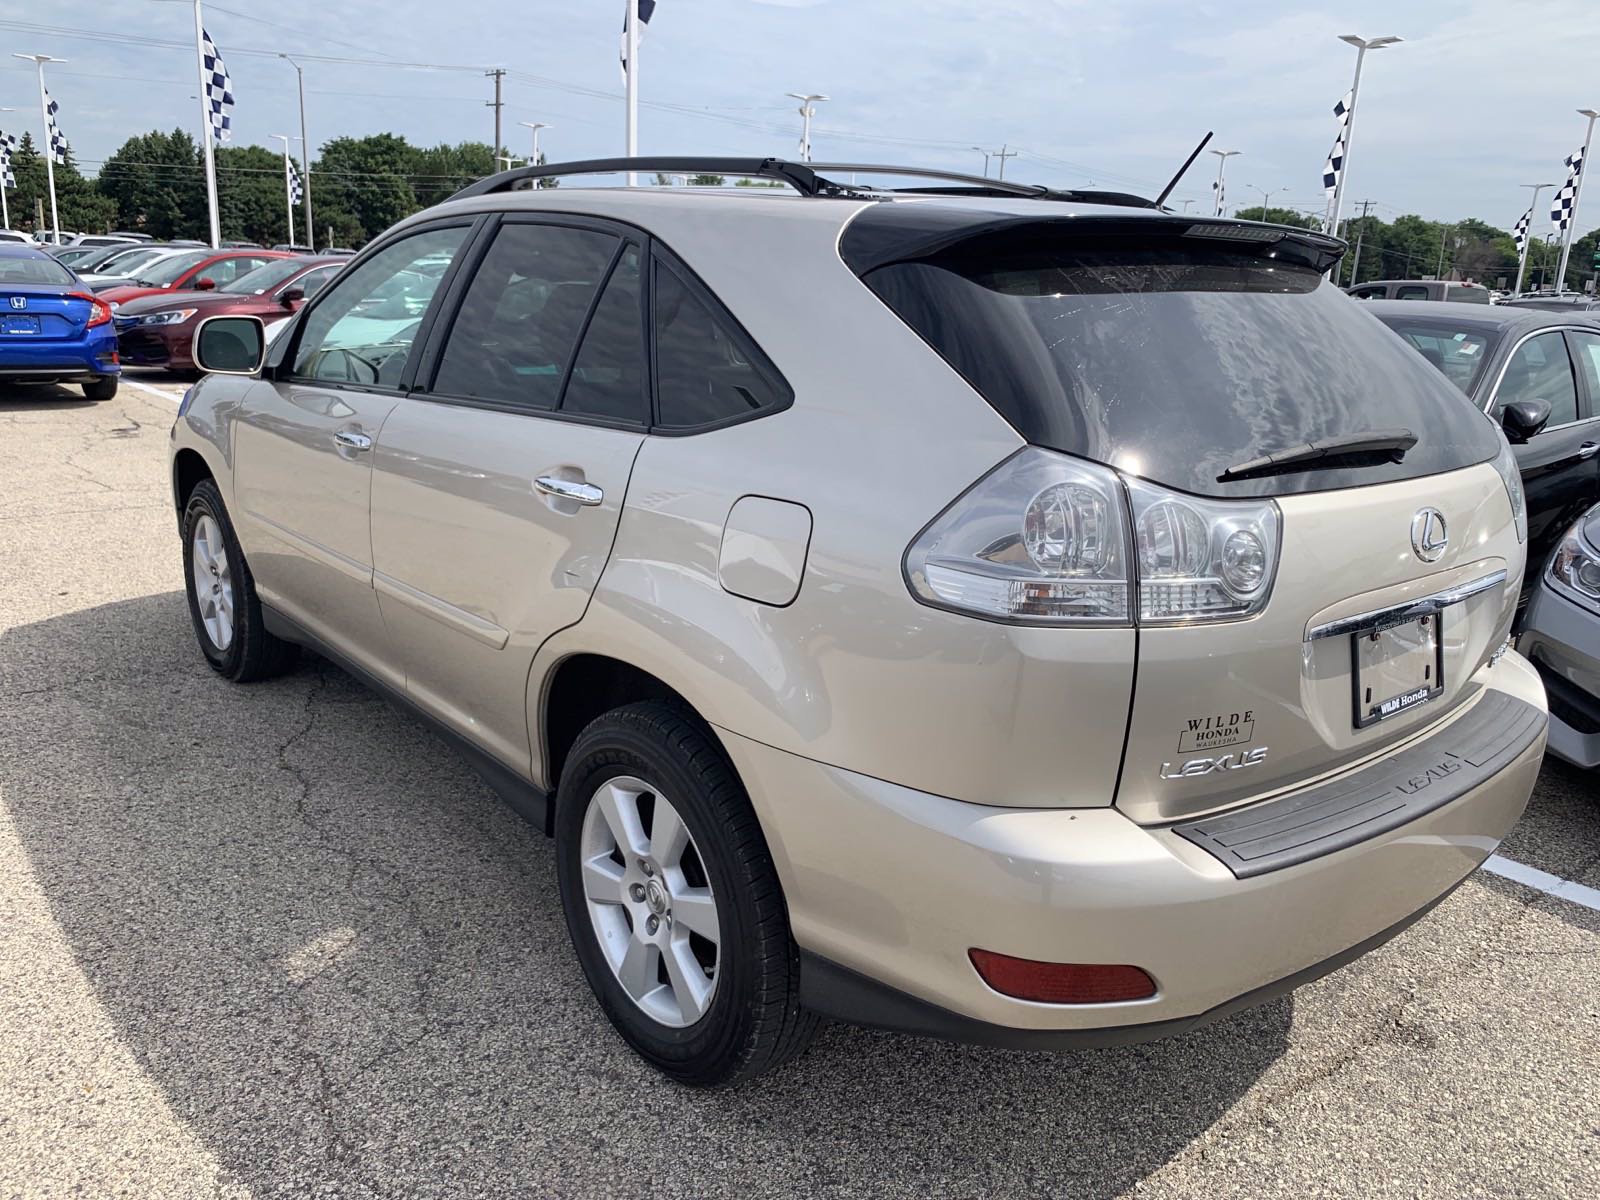 PreOwned 2008 Lexus RX 350 4DR AWD Sport Utility in